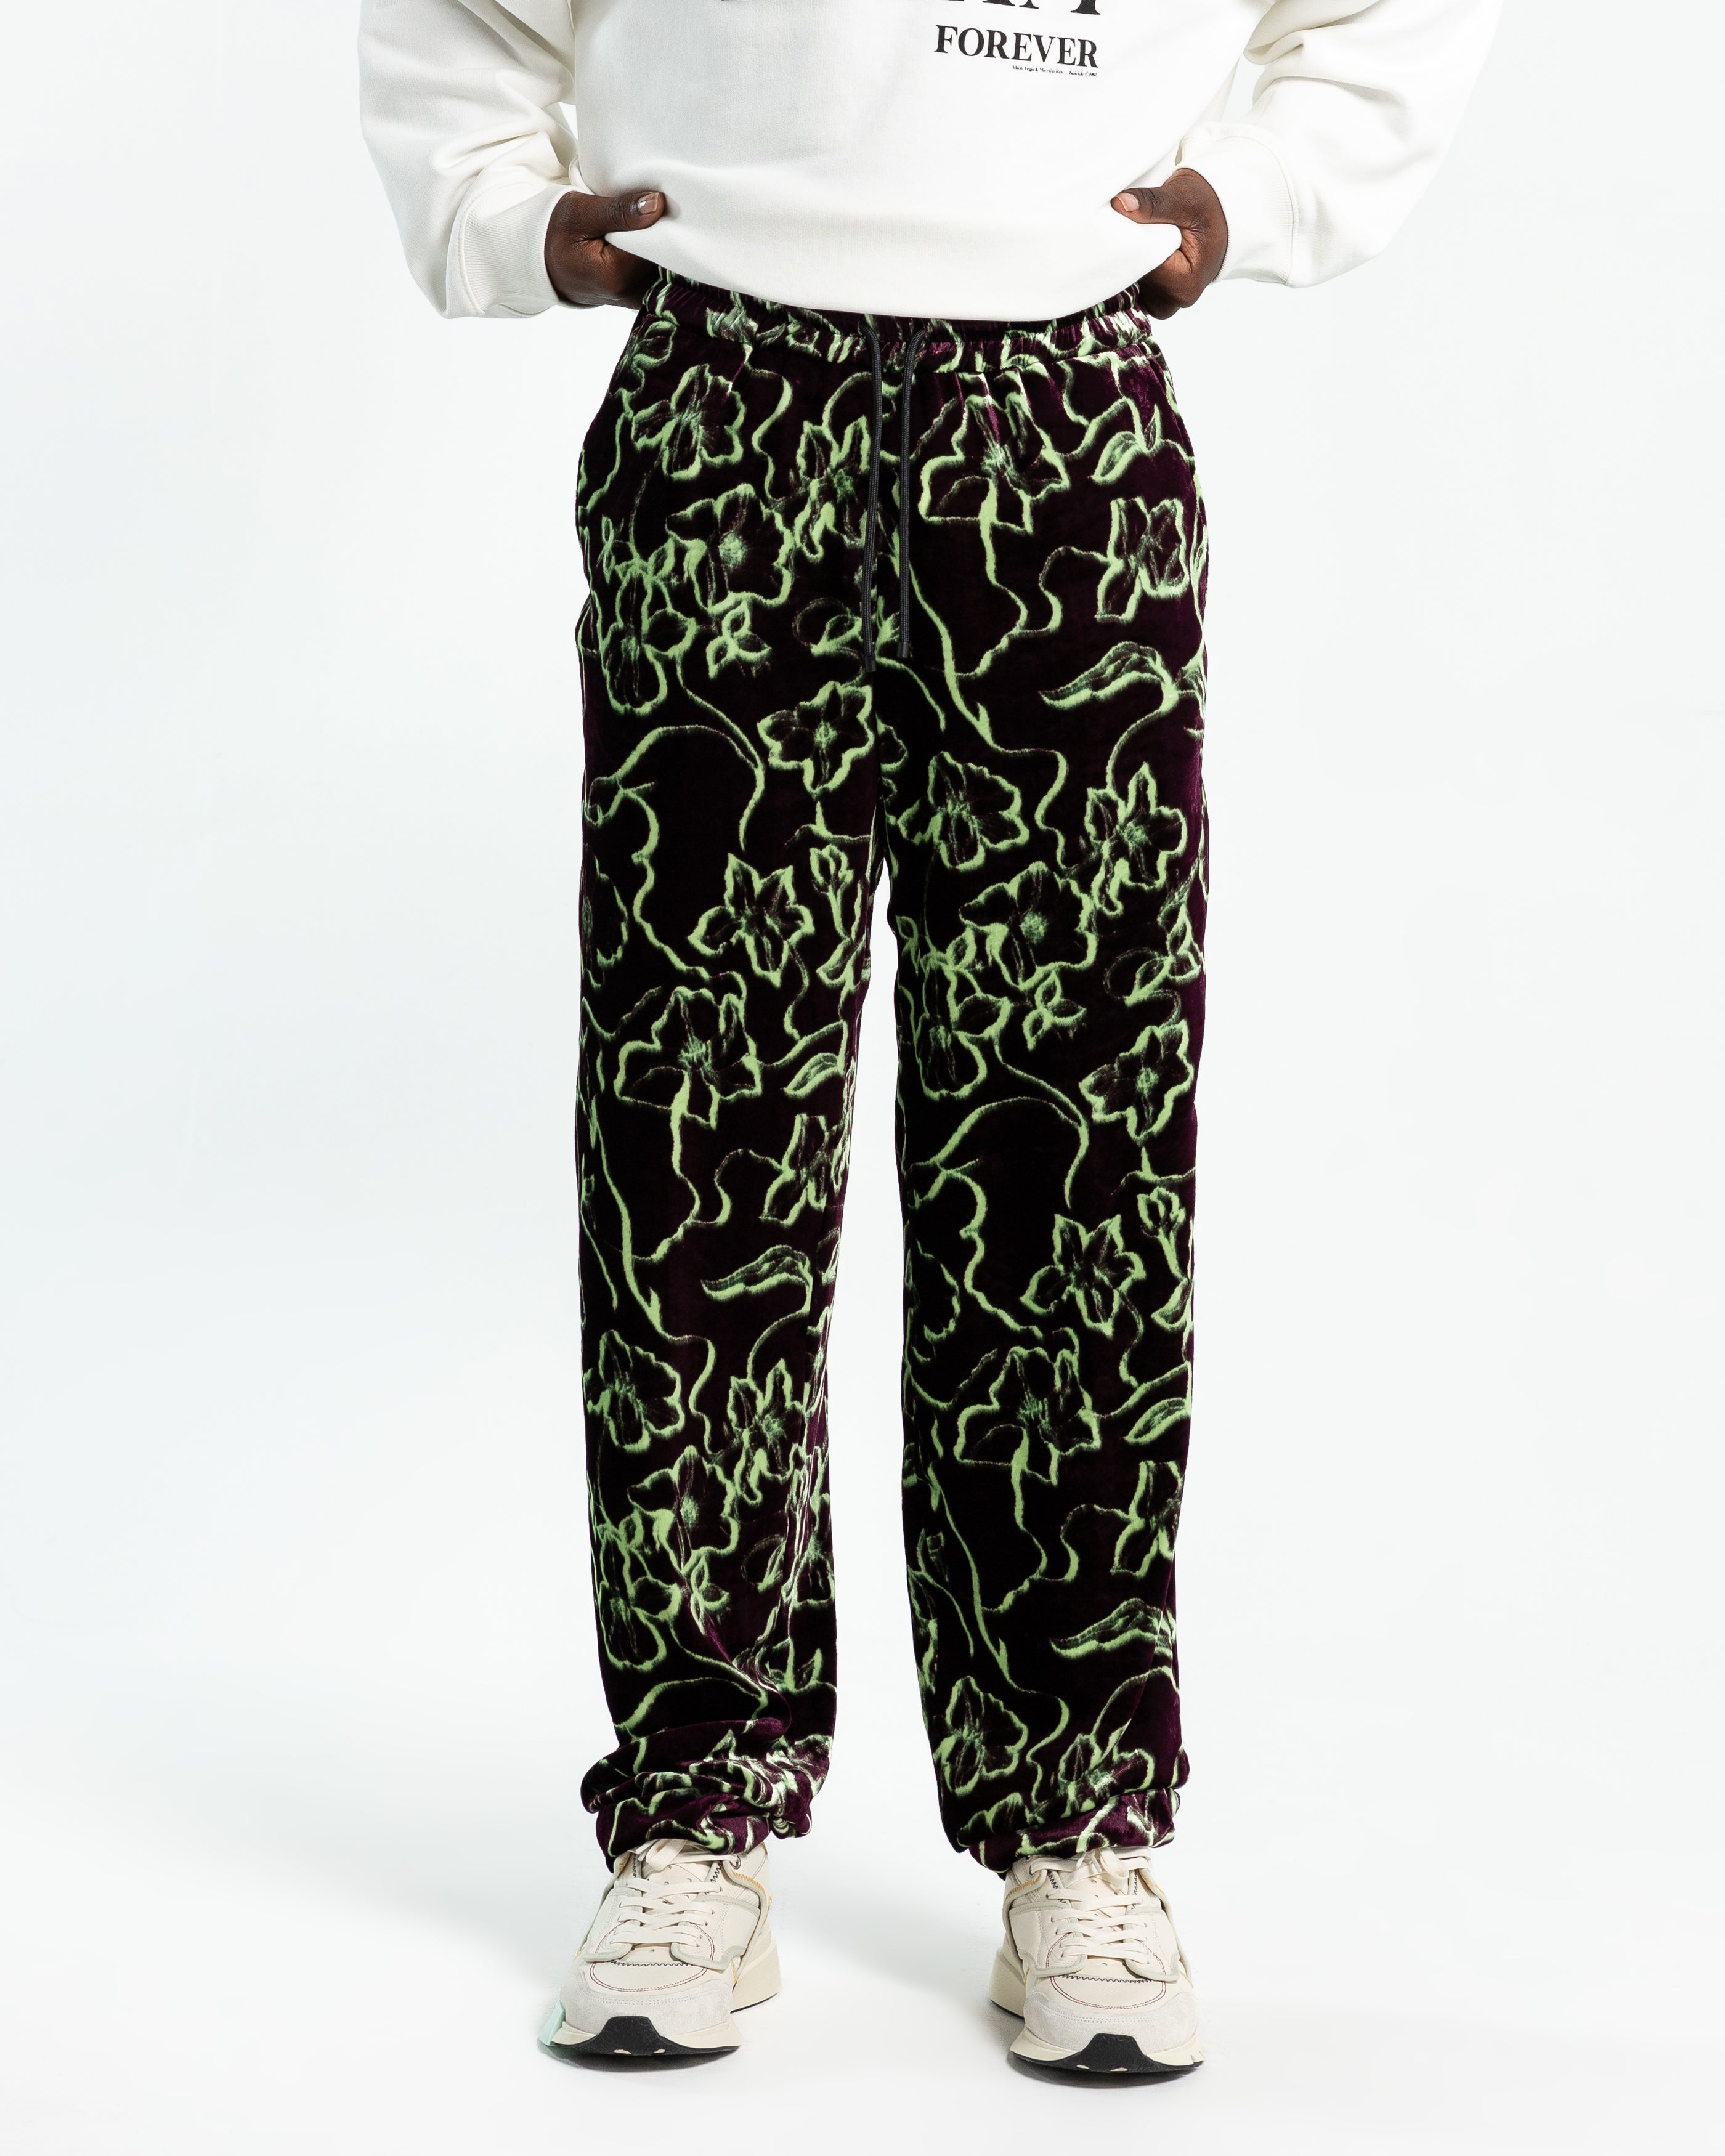 Palace Pant in Auber